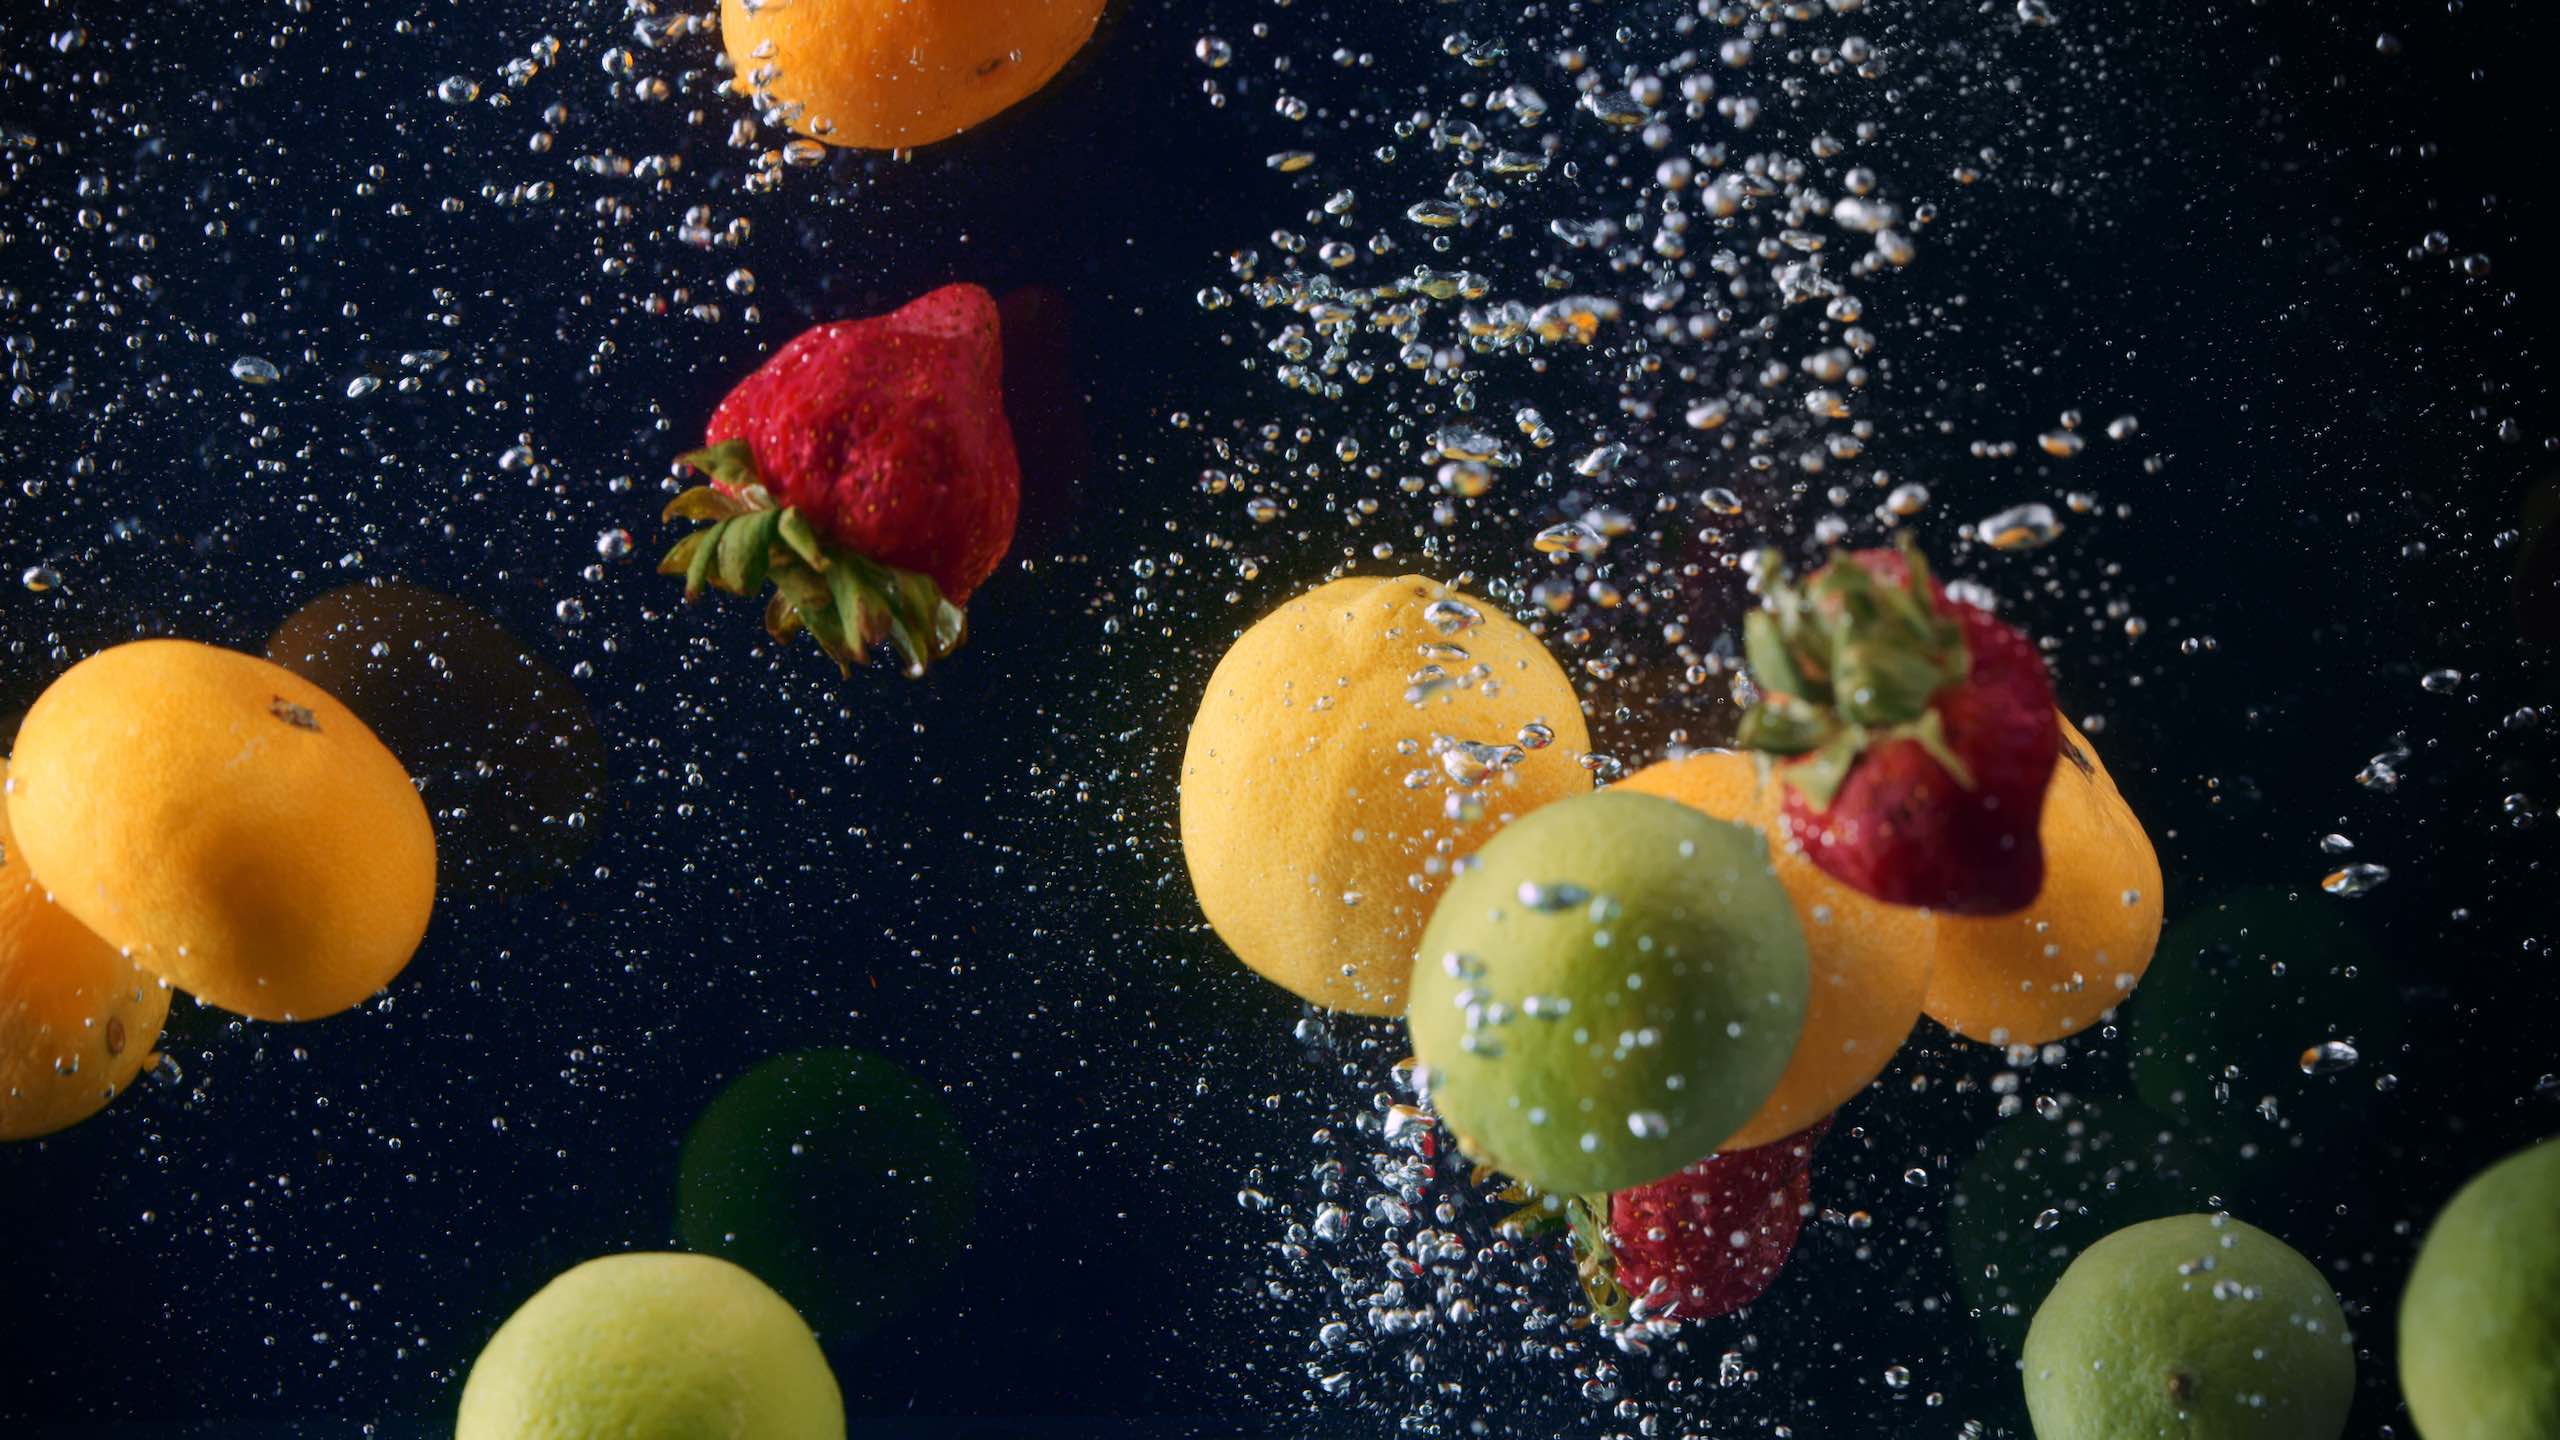 IU C&I Studios Portfolio Just water video ad Tangerines, strawberries and limes under water with bubbles.